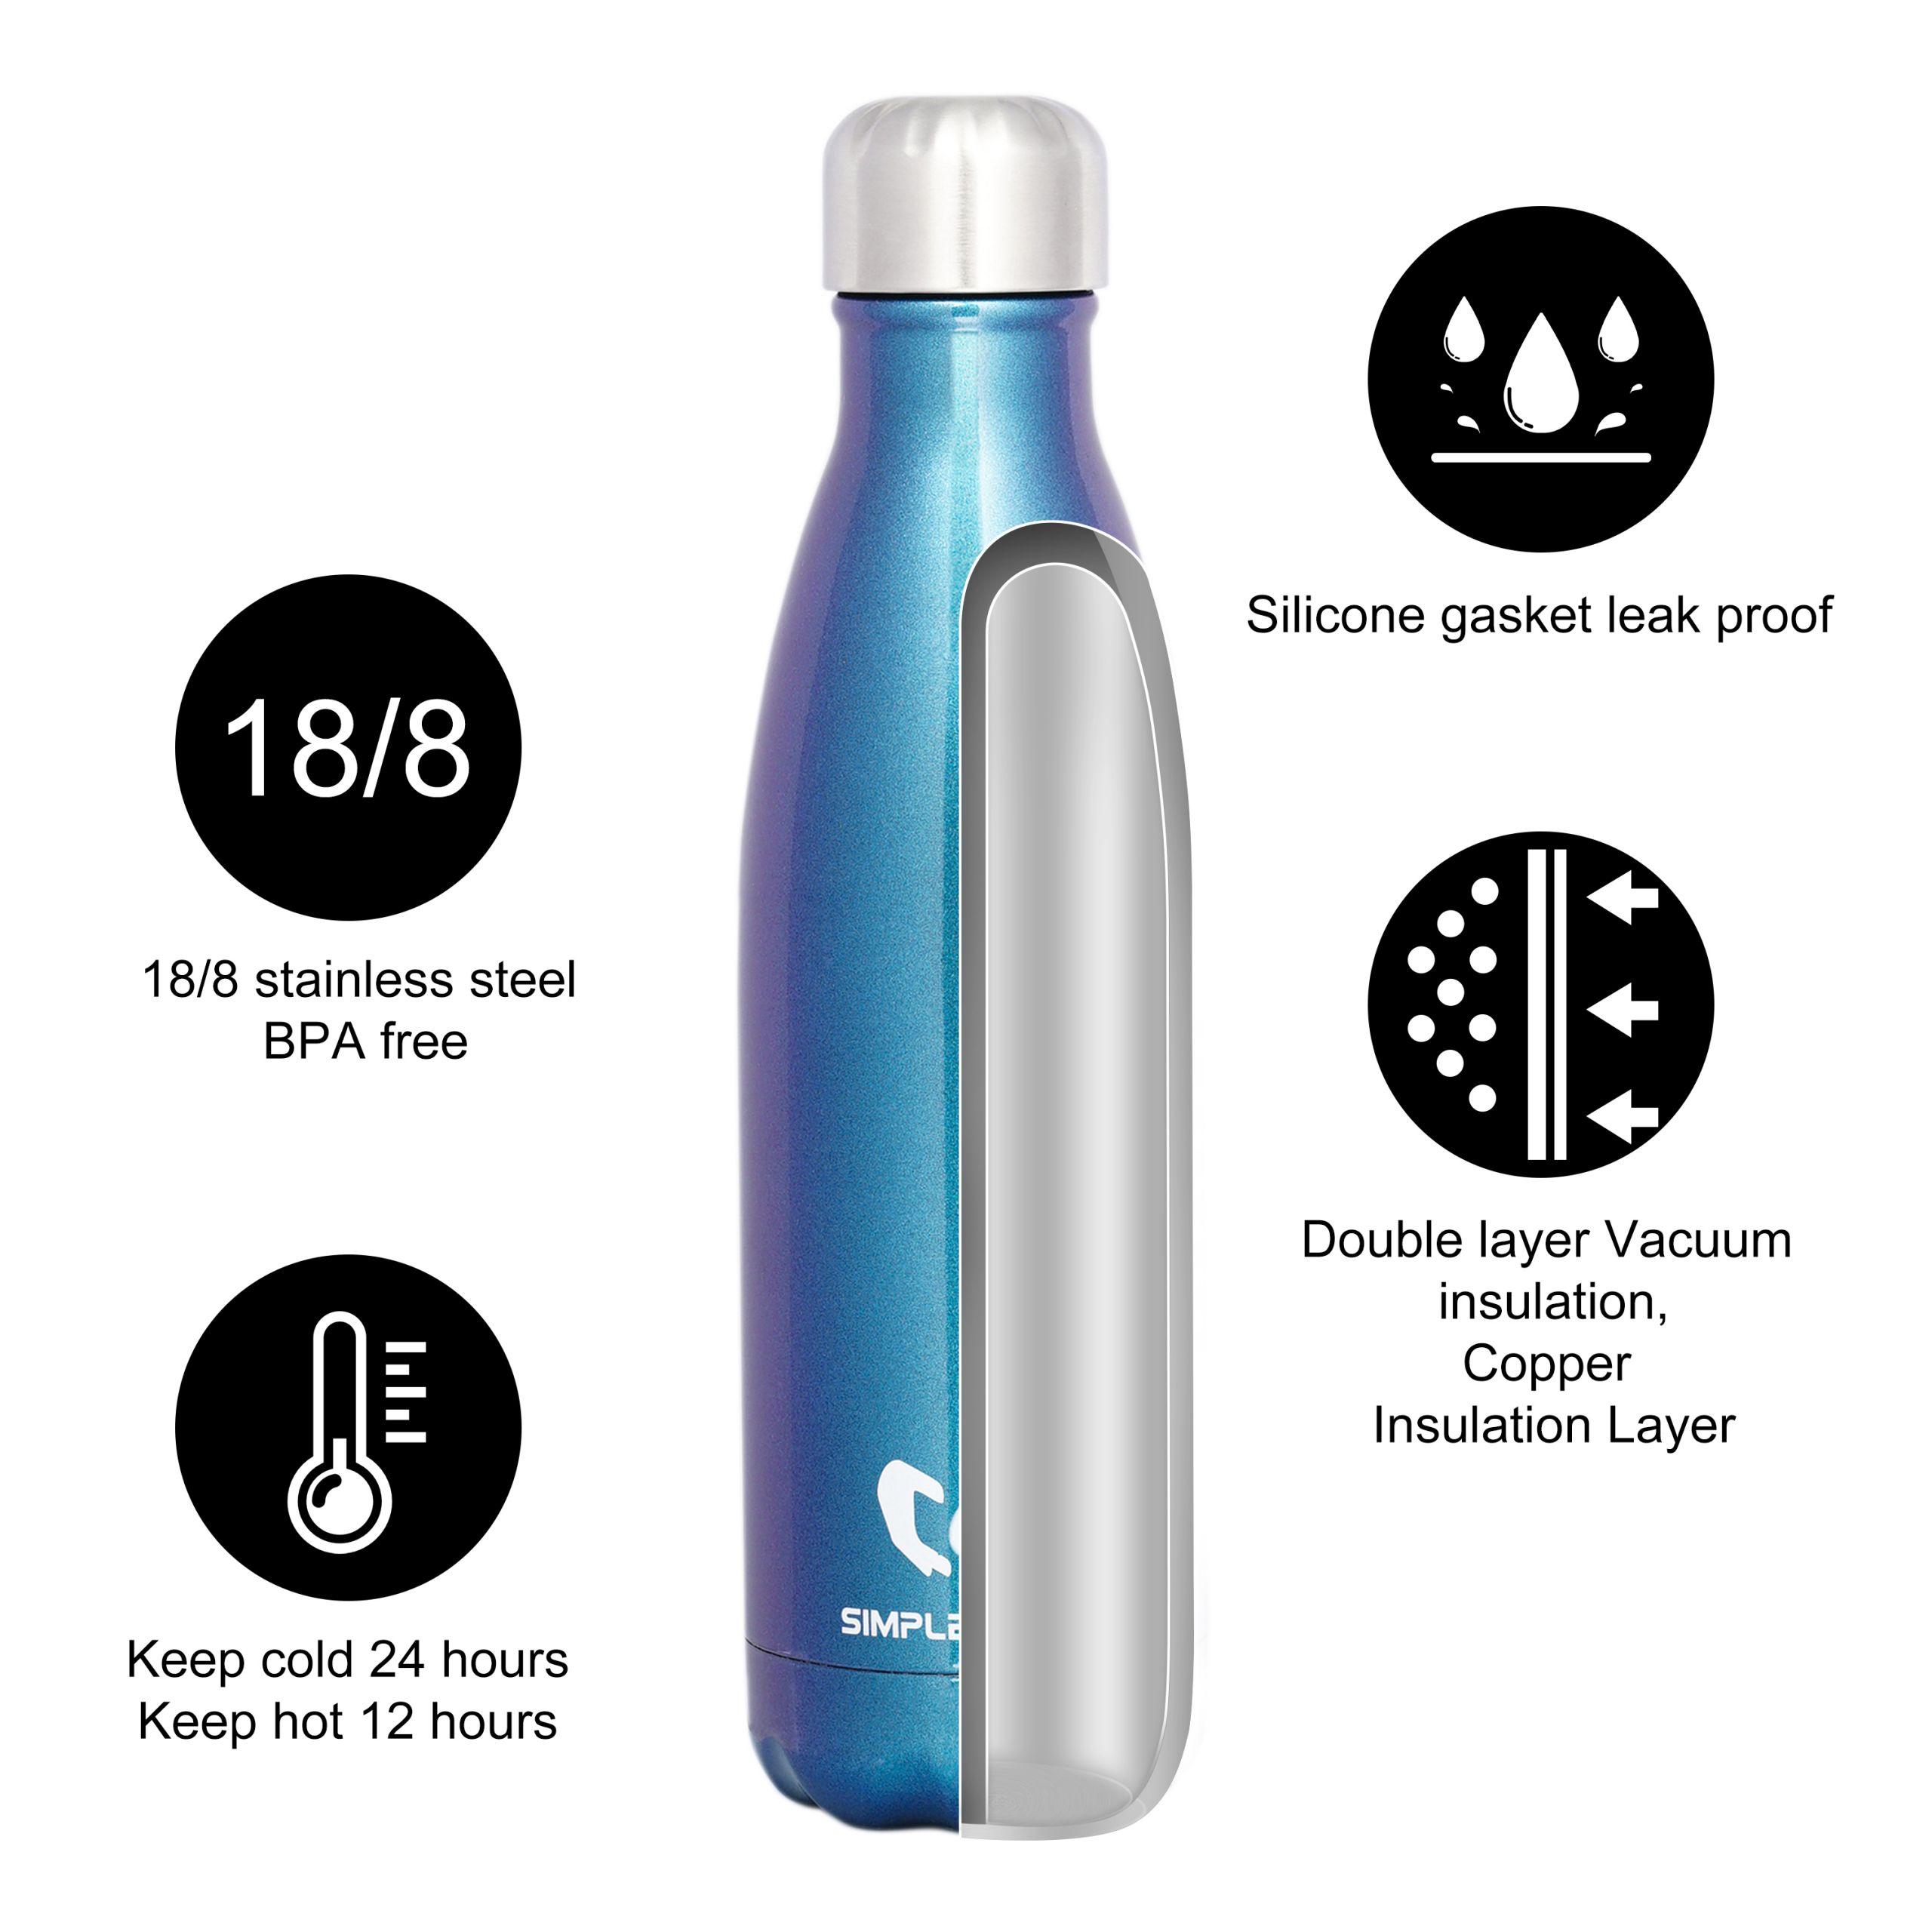 KollyKolla Vacuum Insulated Stainless Steel Water Bottle 12 Oz/17 Oz/22 Oz/  25 Oz Double Walled Cola Shape Metal Reusable Water Bottle Kids Thermos  Keep Drinks Hot and Cold for Sports Travel Outdoor 